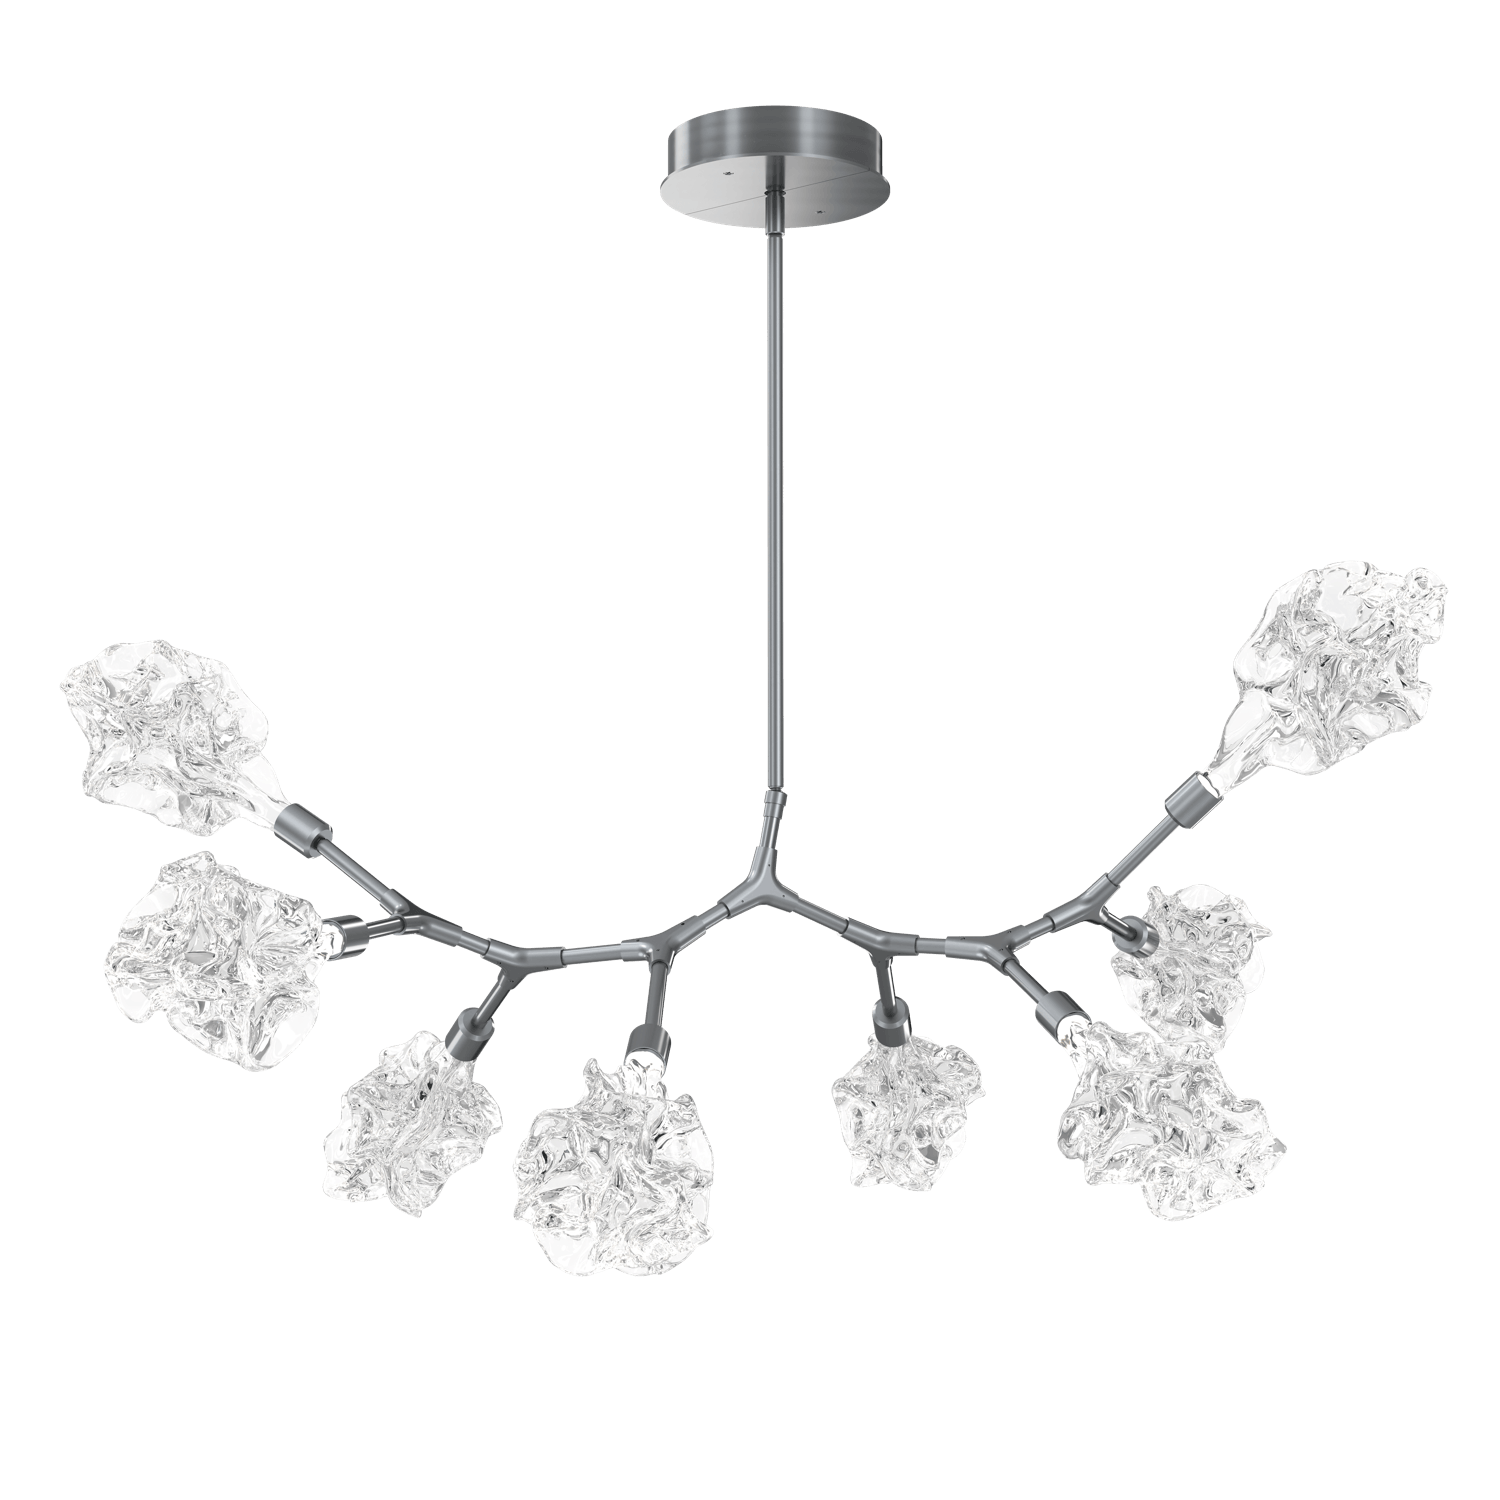 PLB0059-BB-GM-Hammerton-Studio-Blossom-8-light-organic-branch-chandelier-with-gunmetal-finish-and-clear-handblown-crystal-glass-shades-and-LED-lamping